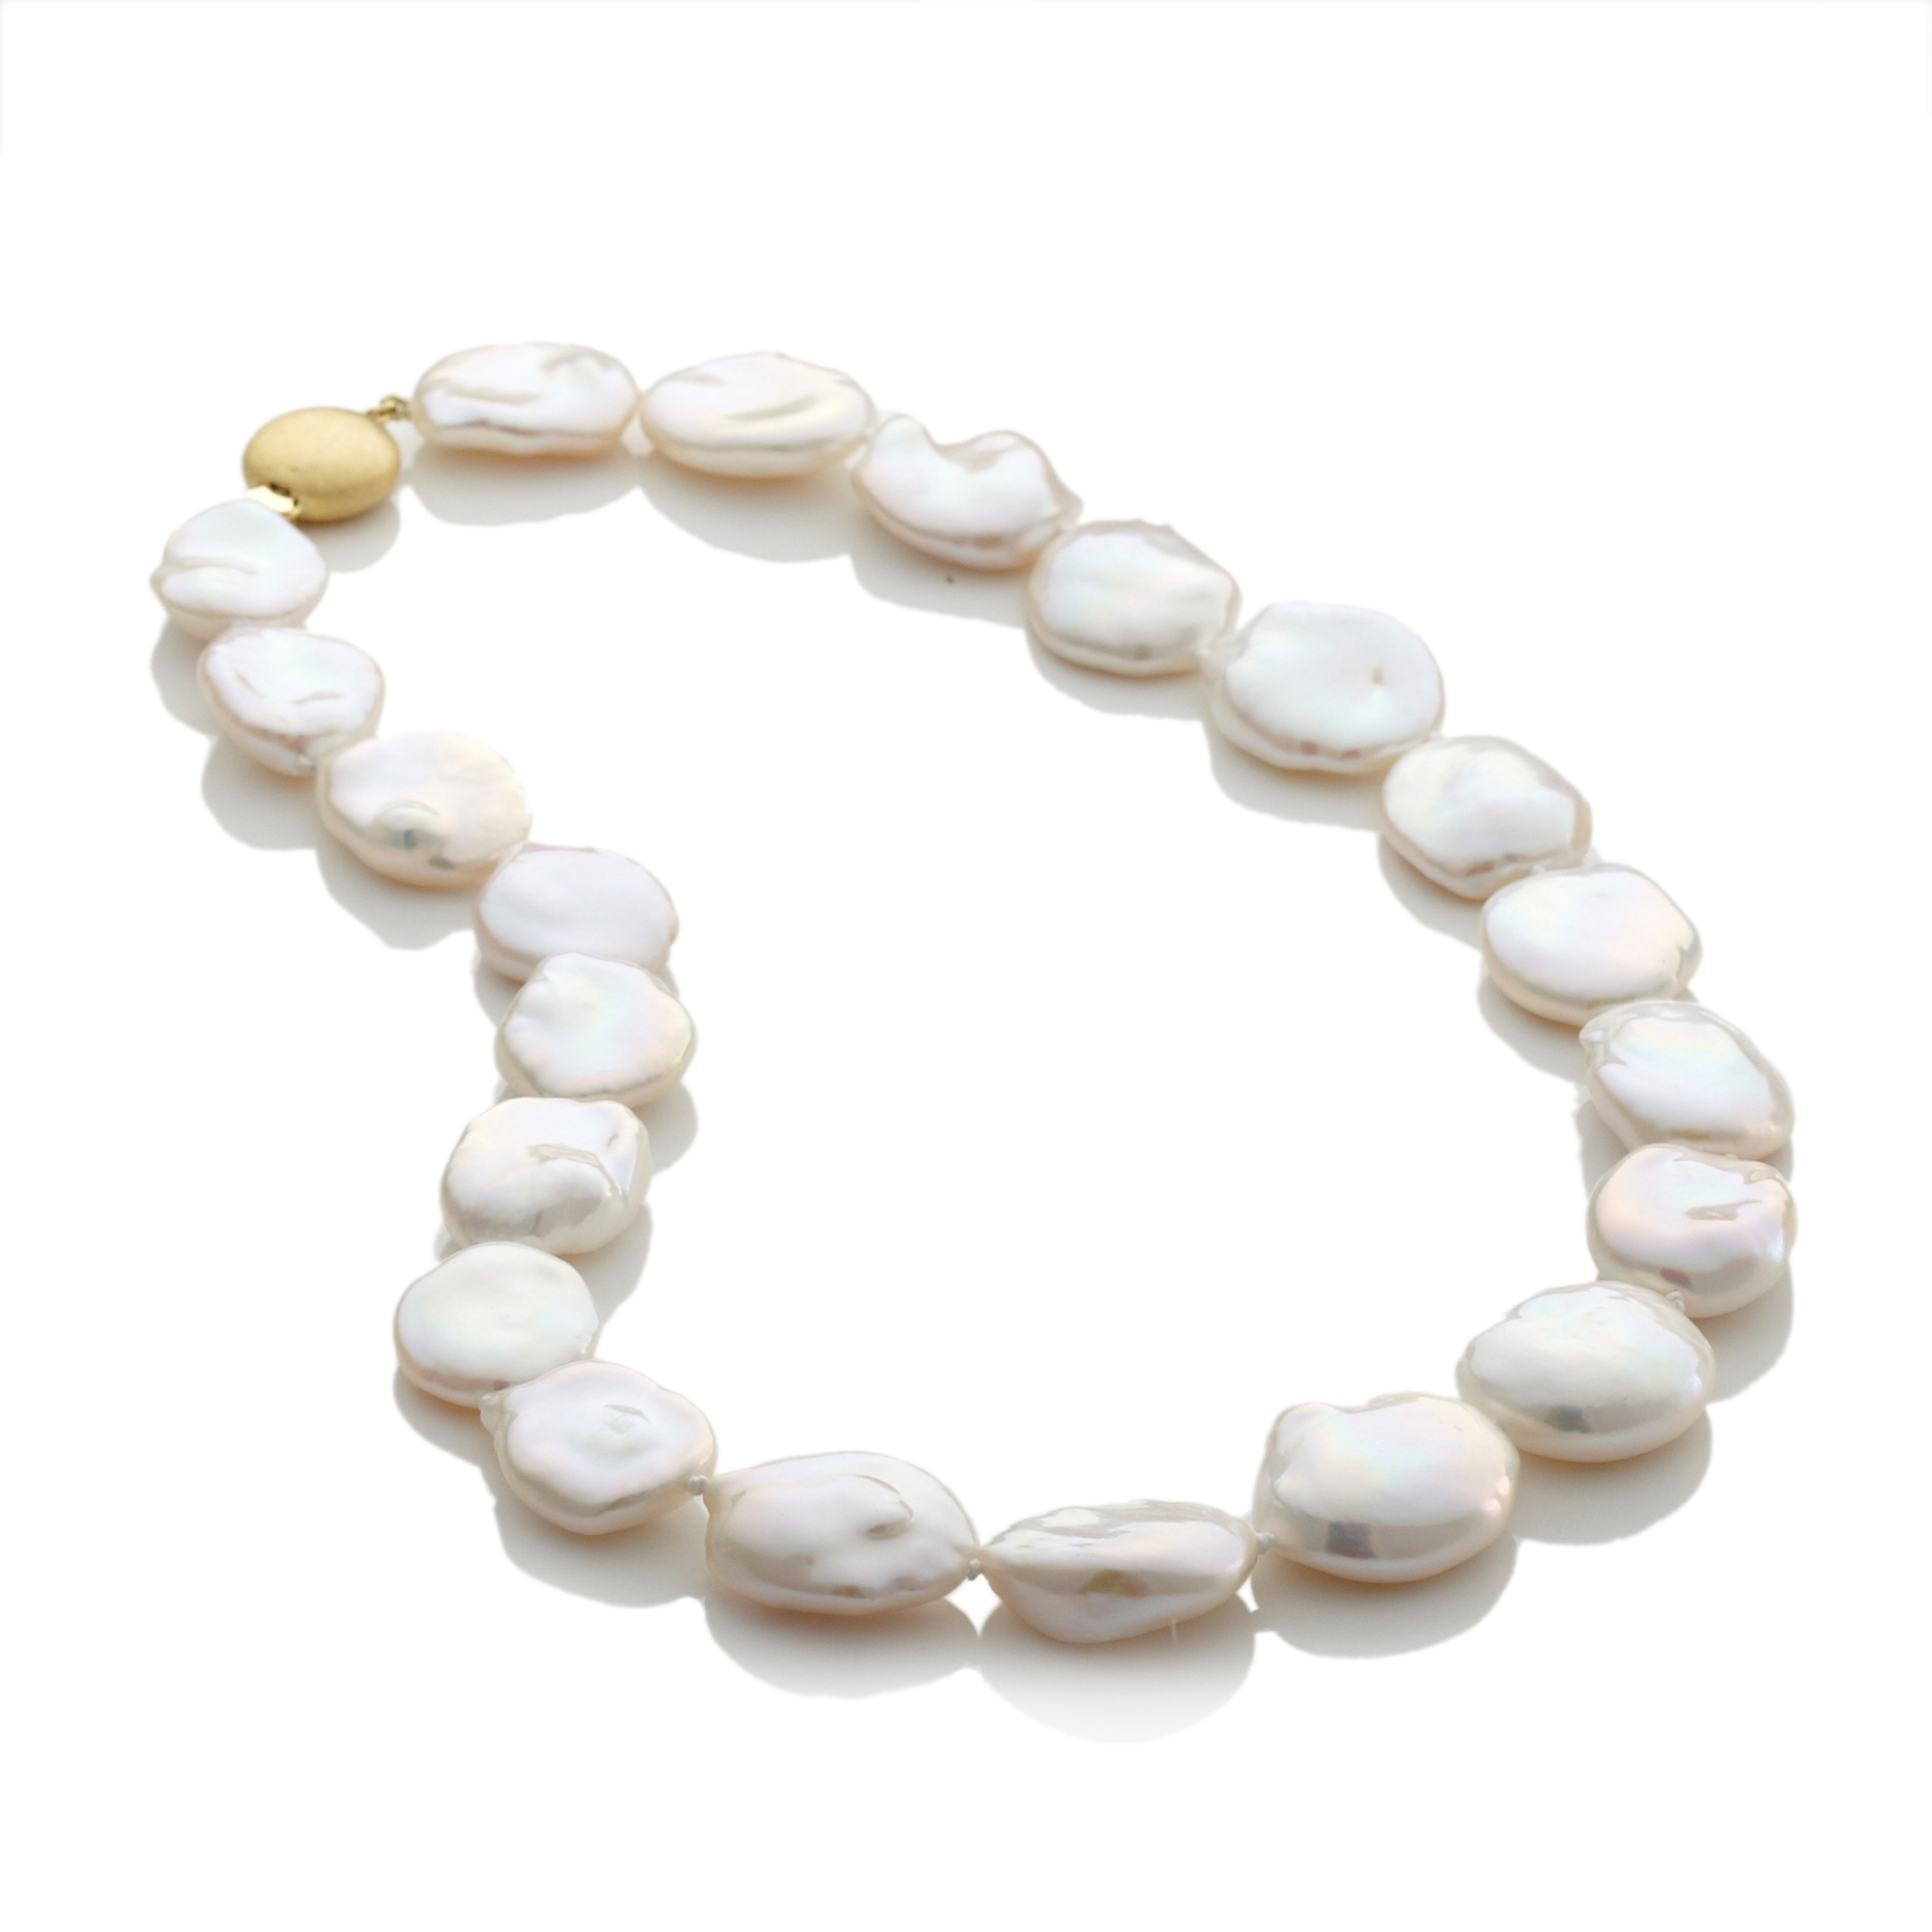 Gump's Baroque Flat Freshwater Pearl Necklace | Gump's